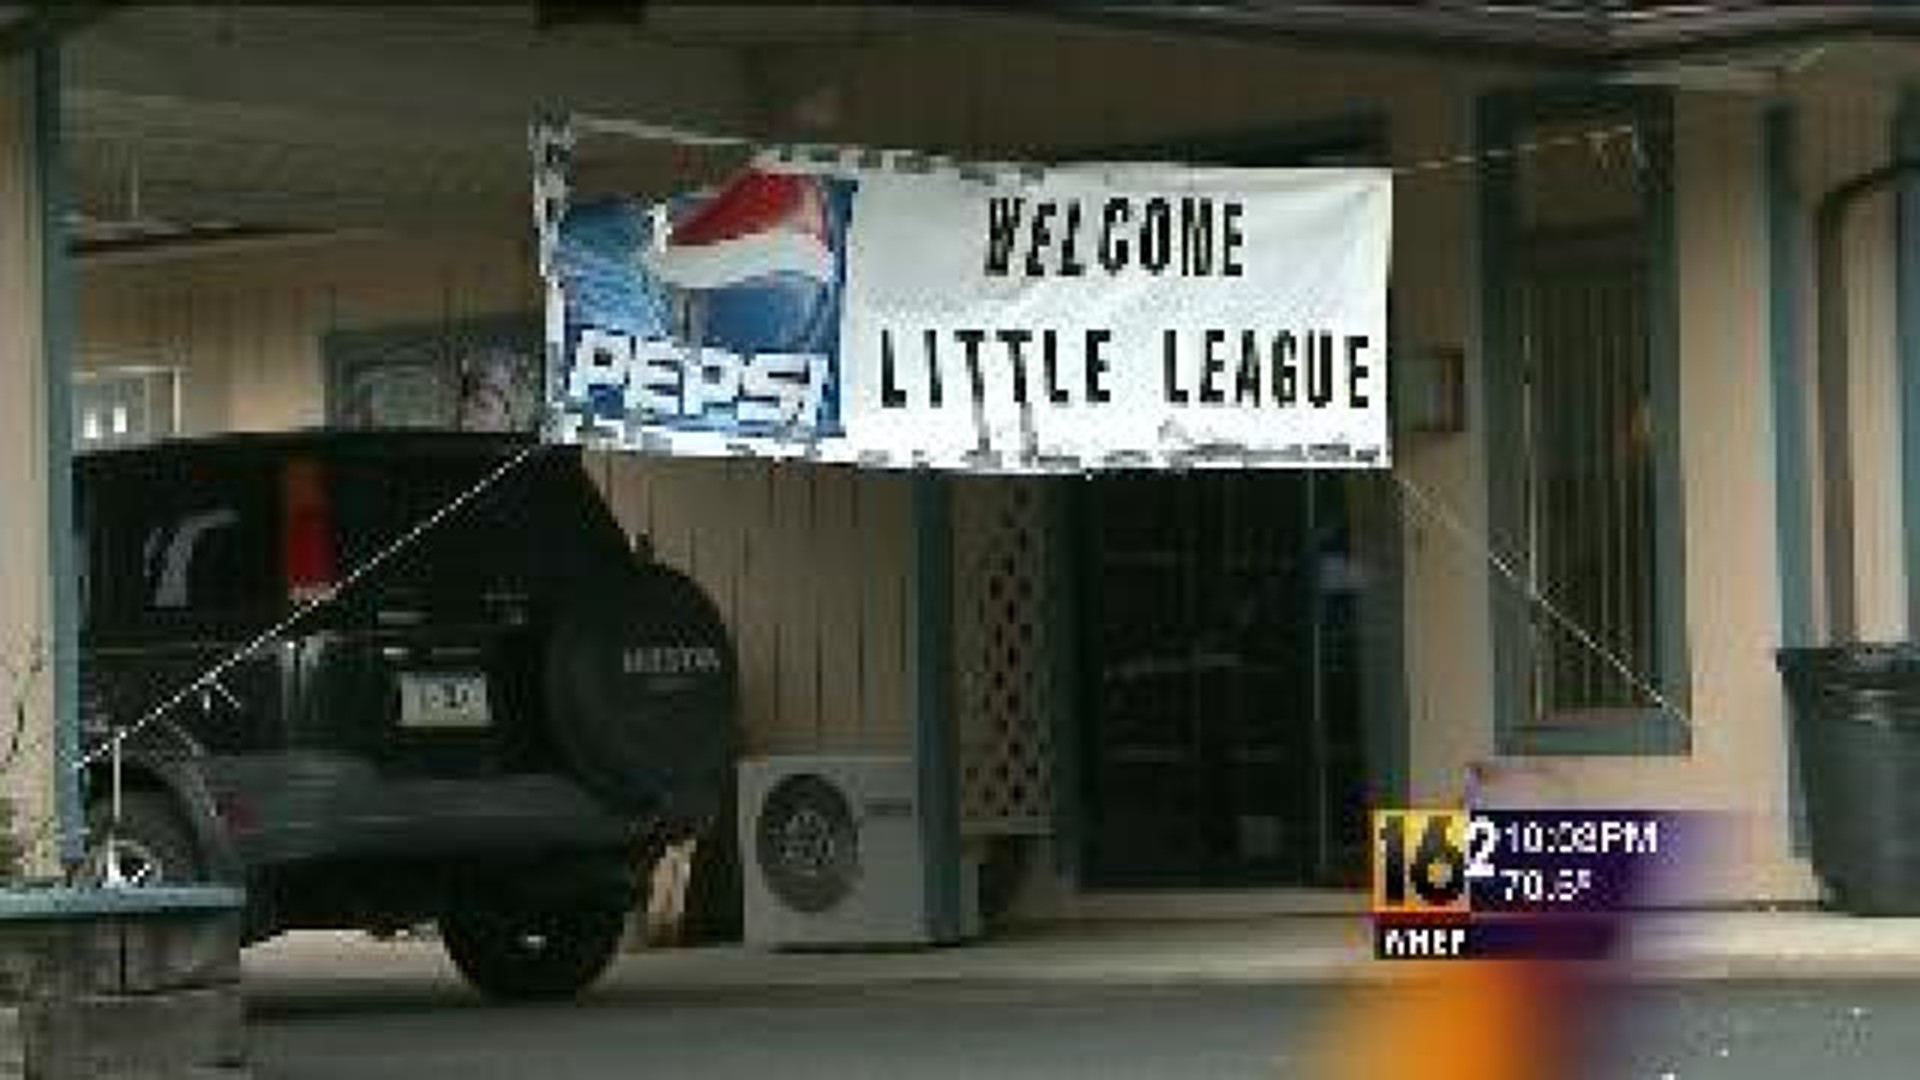 People Gear Up for Little League Series